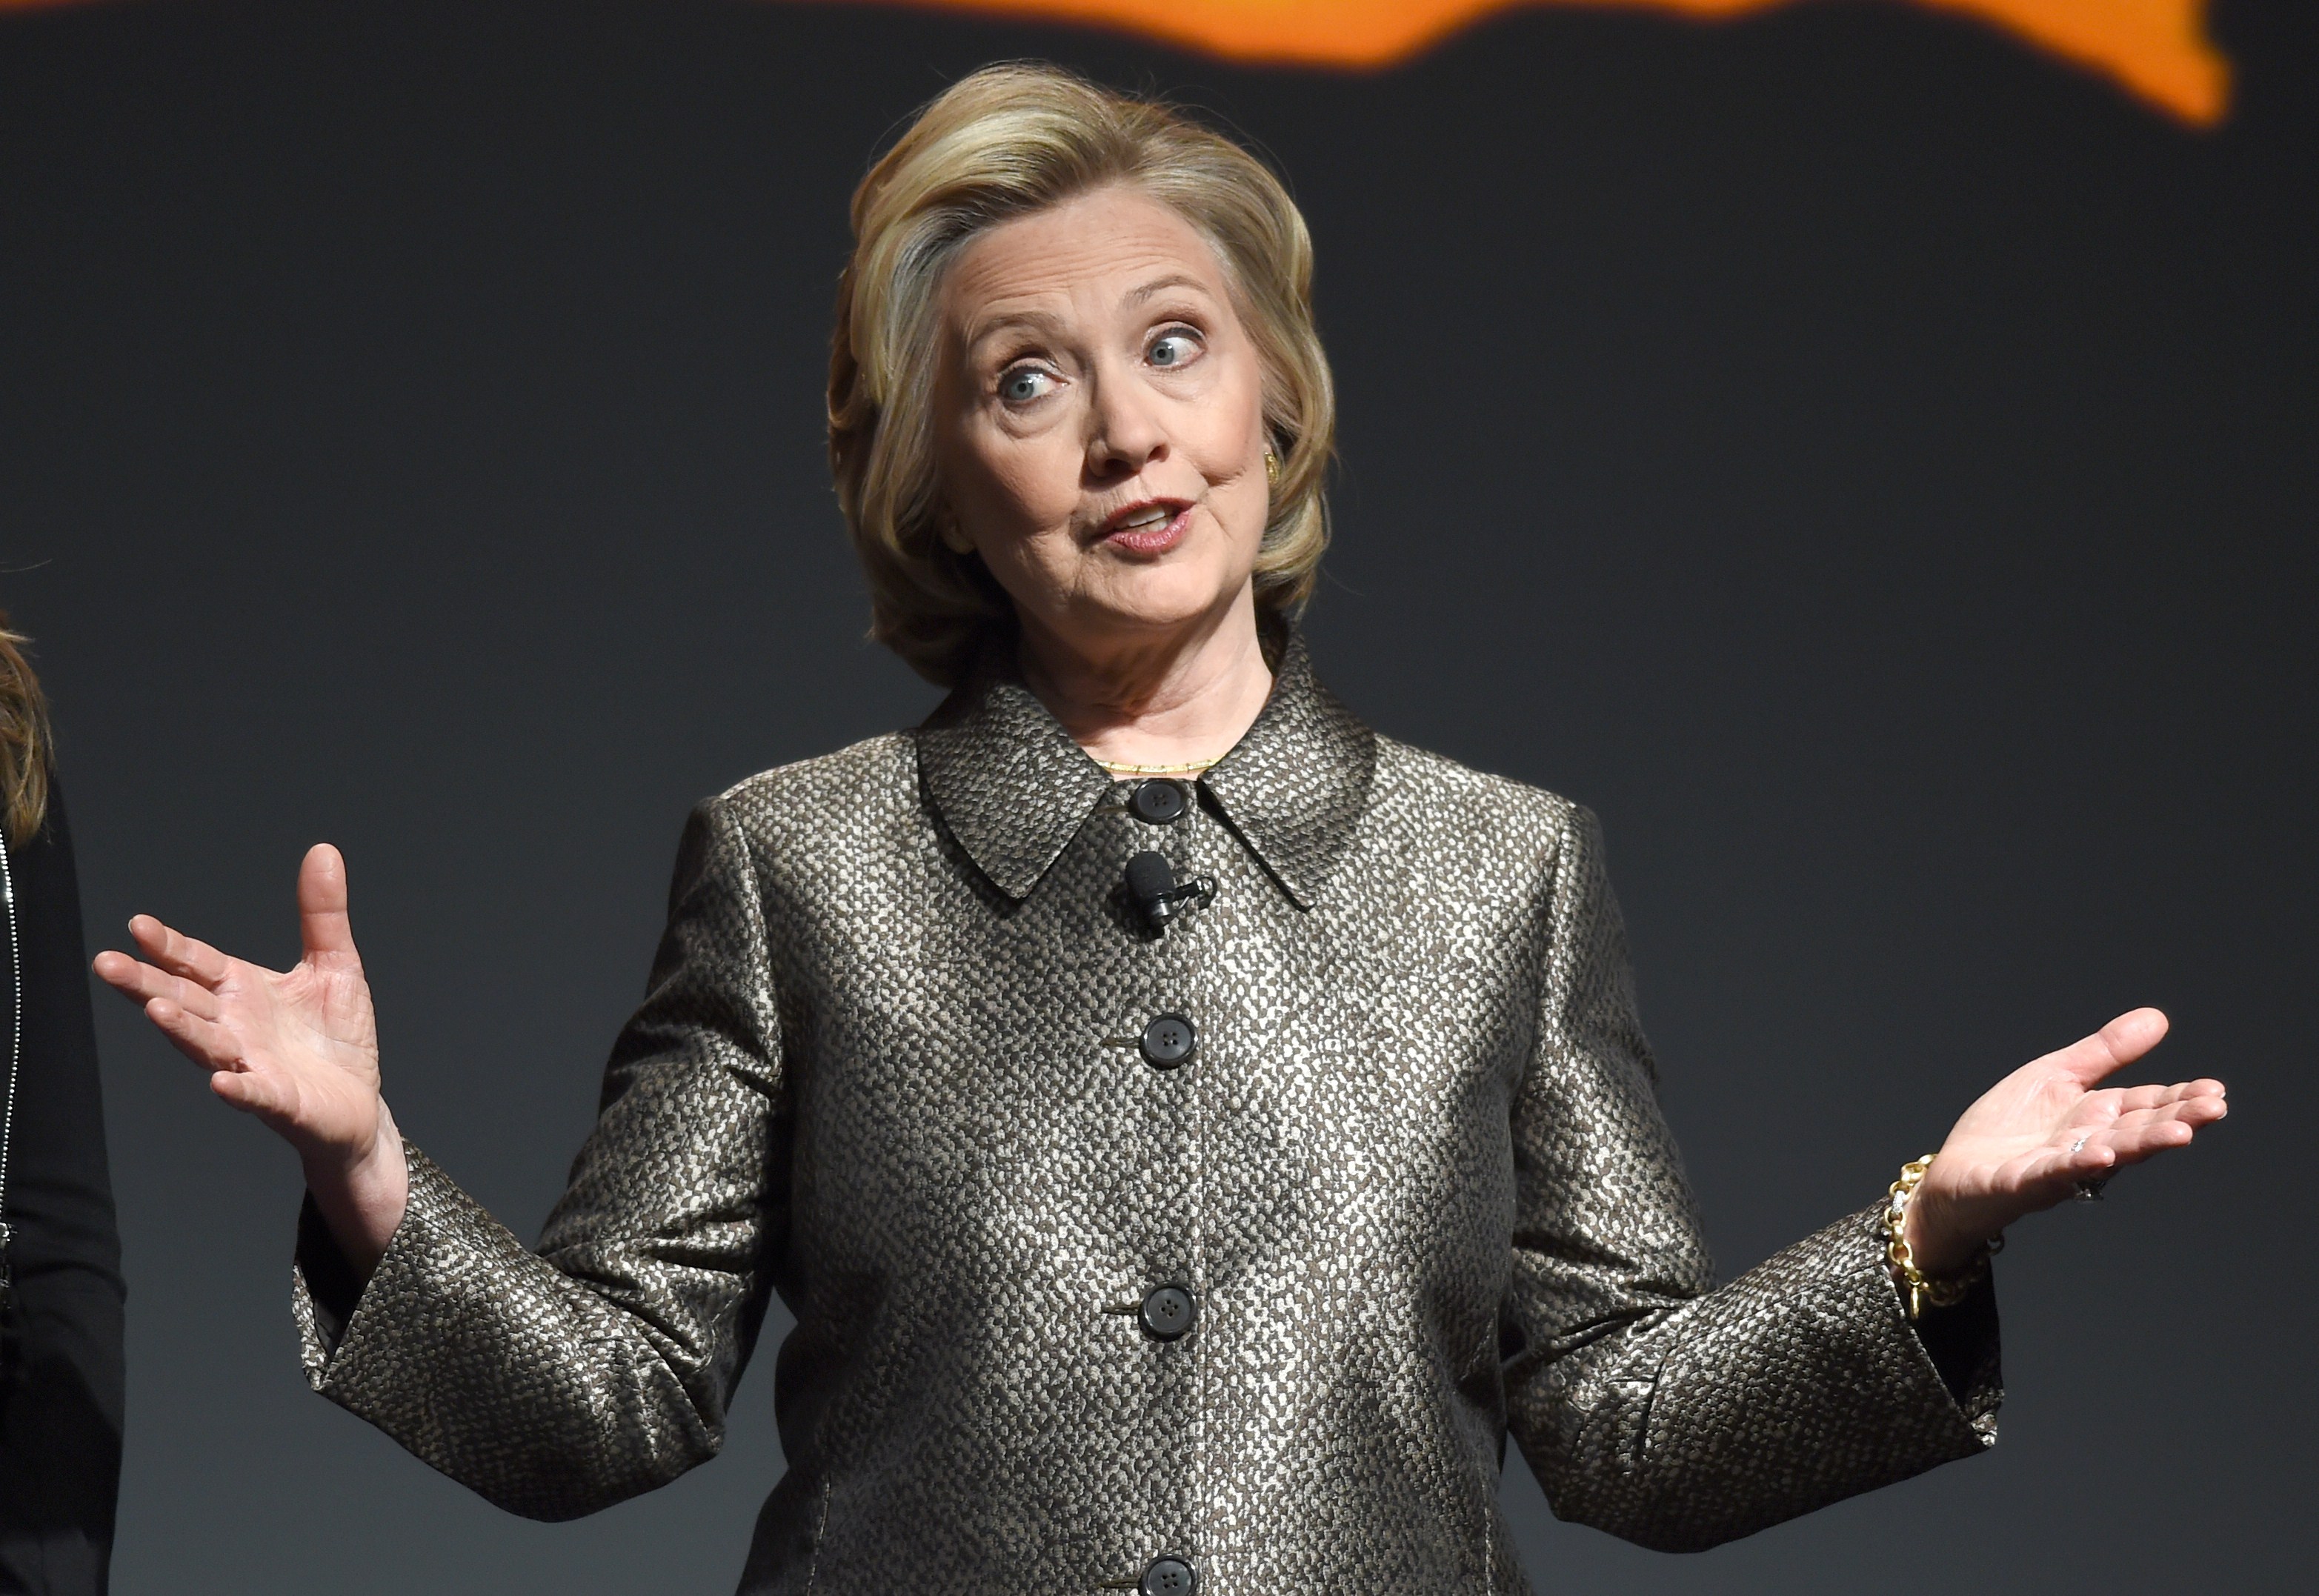 Hillary Clinton speaks at a women's equality event March 9, 2015 in New York. (DON EMMERT&mdash;AFP/Getty Images)